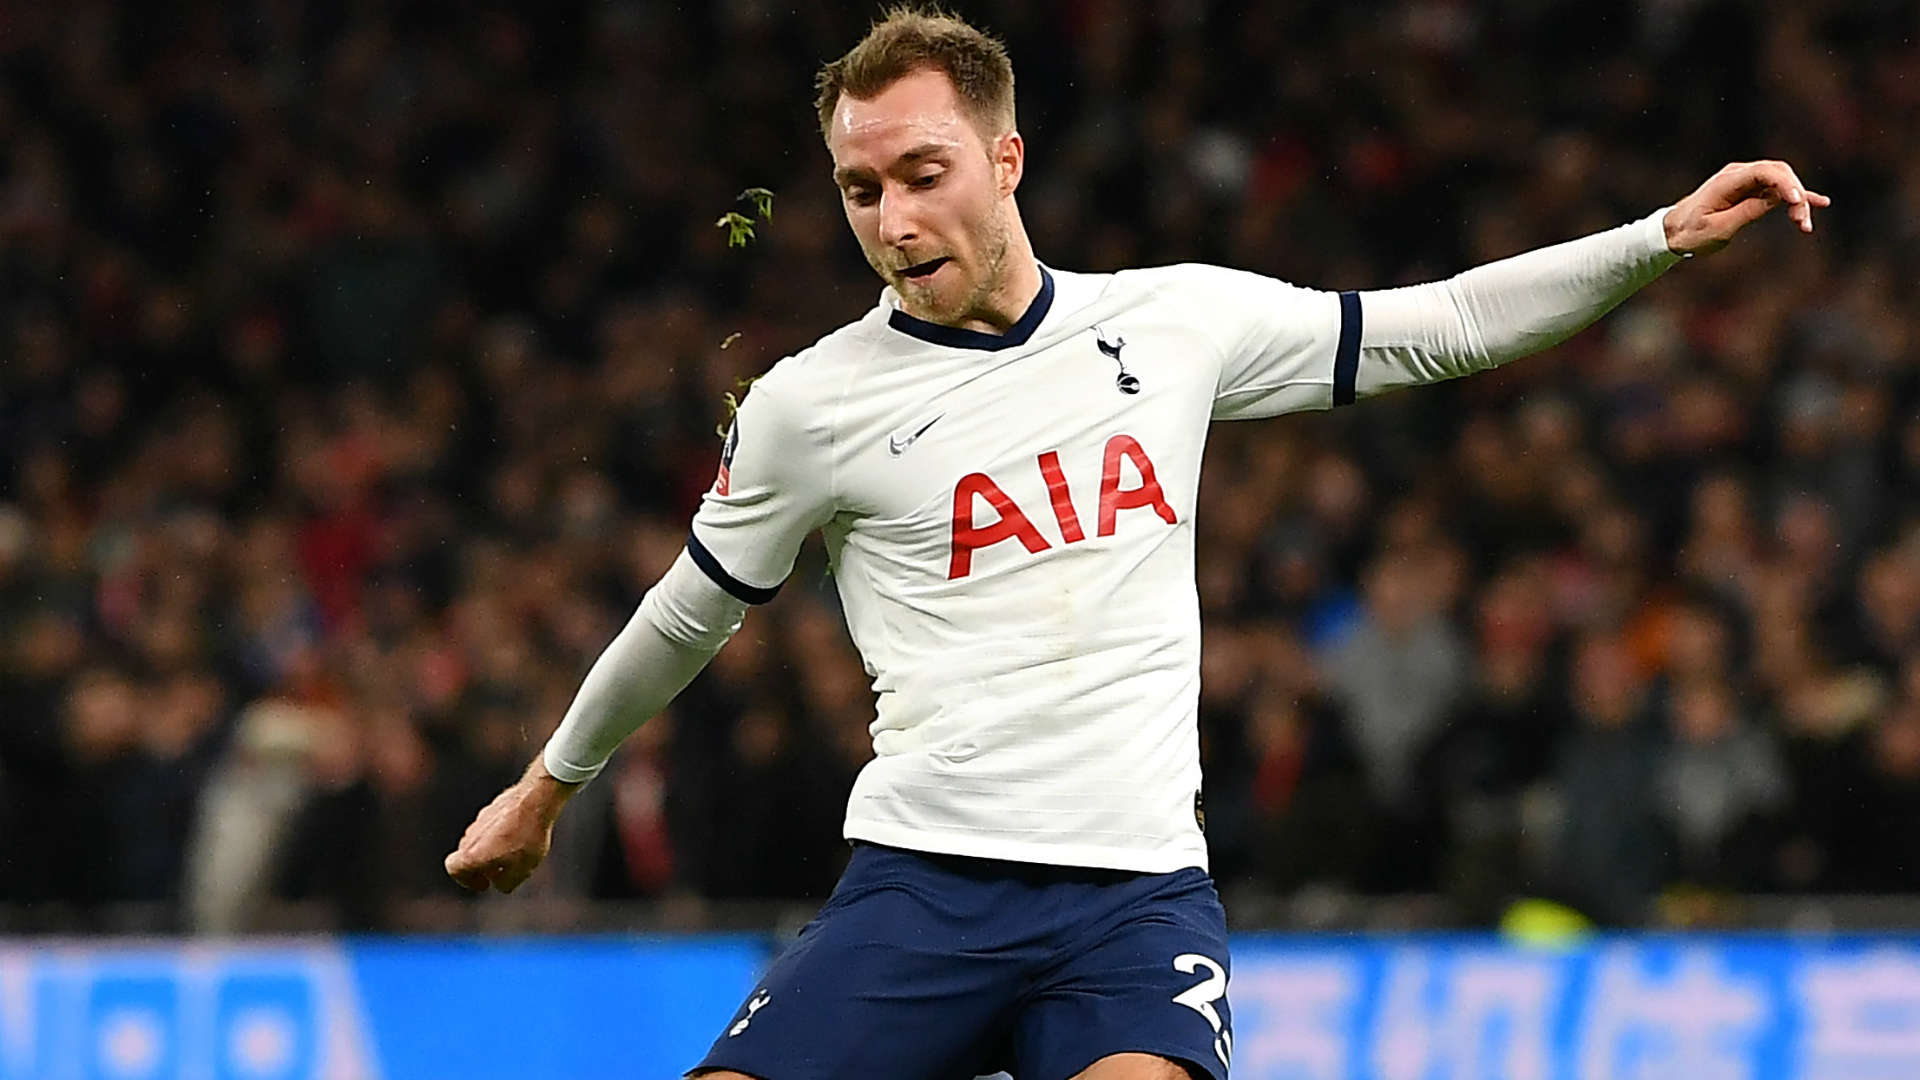 Jose Mourinho was asked about Christian Eriksen and his future following Tottenham's FA Cup win on Tuesday.